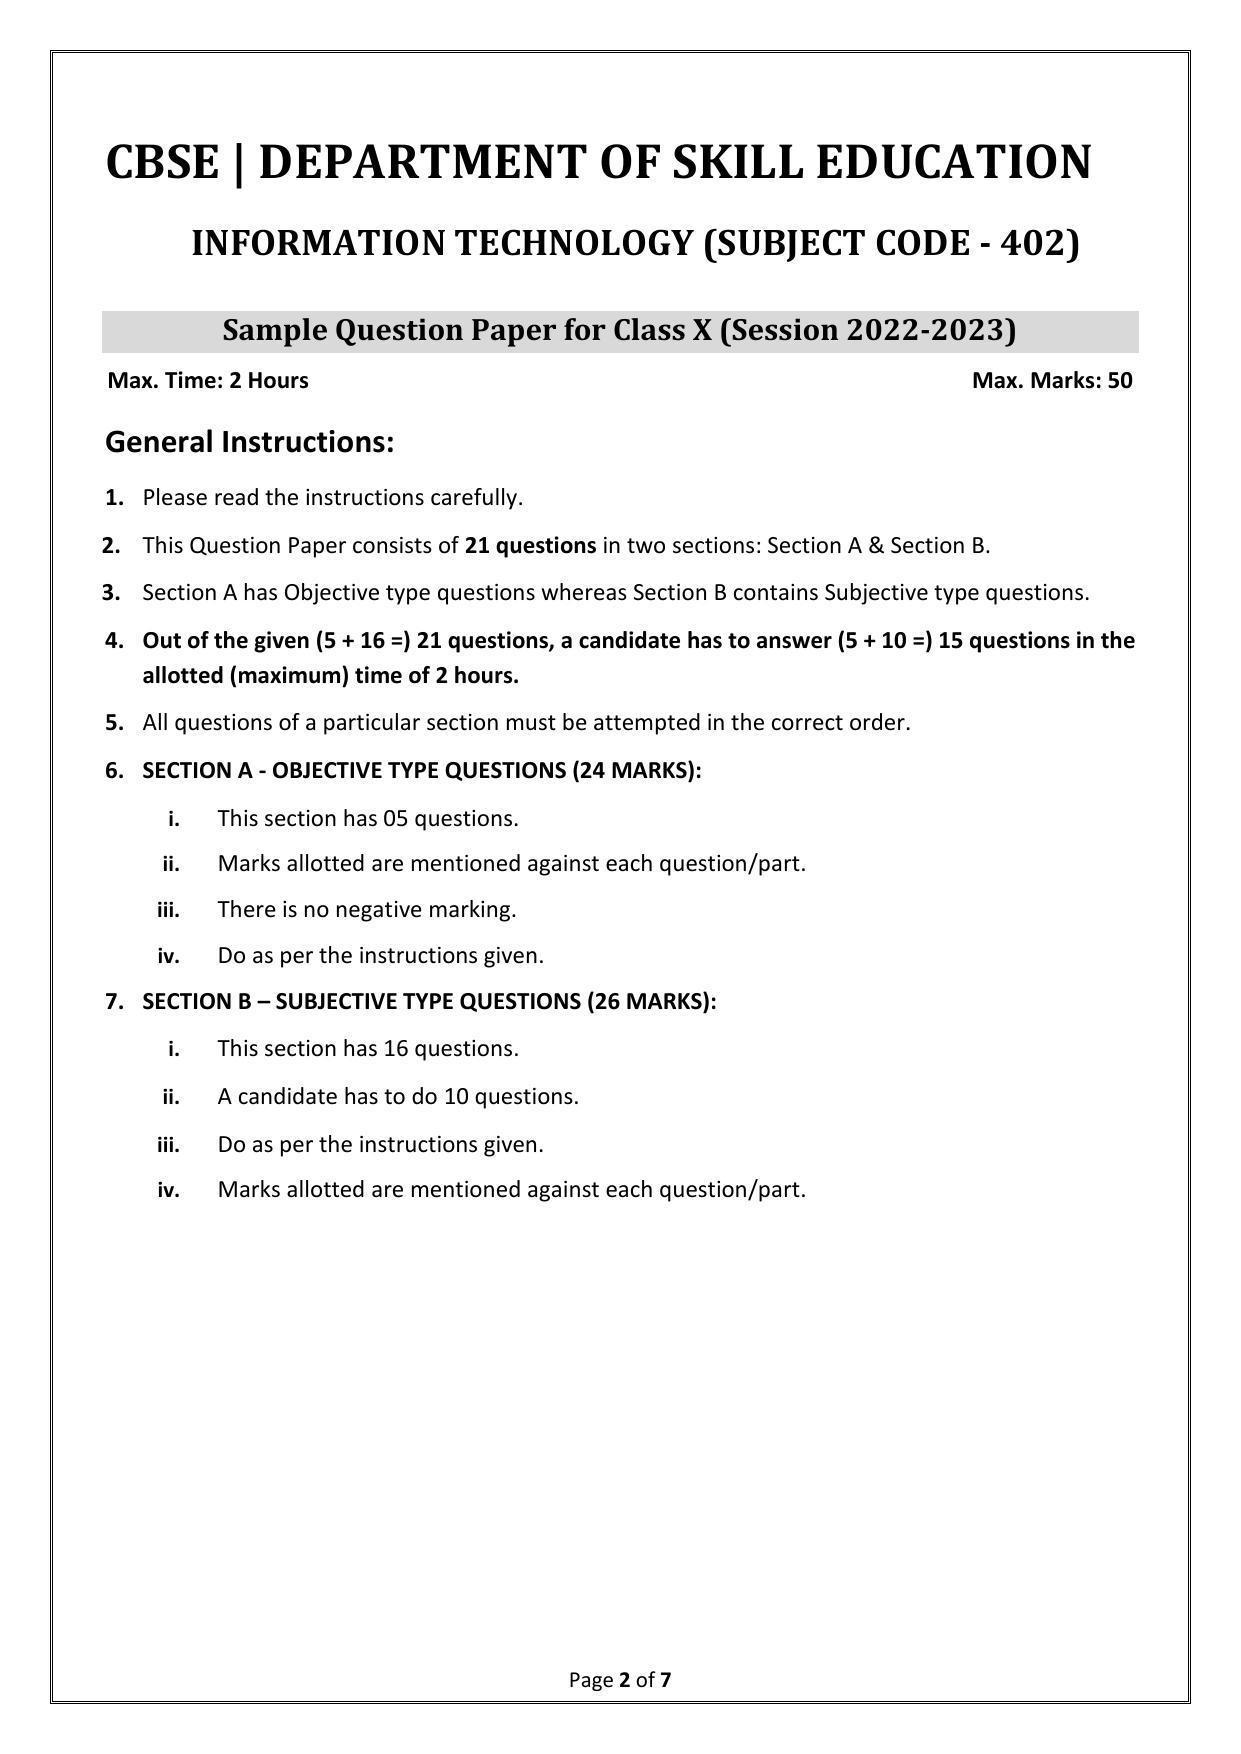 CBSE Class 10 (Skill Education) Information Technology Sample Papers 2023 - Page 2